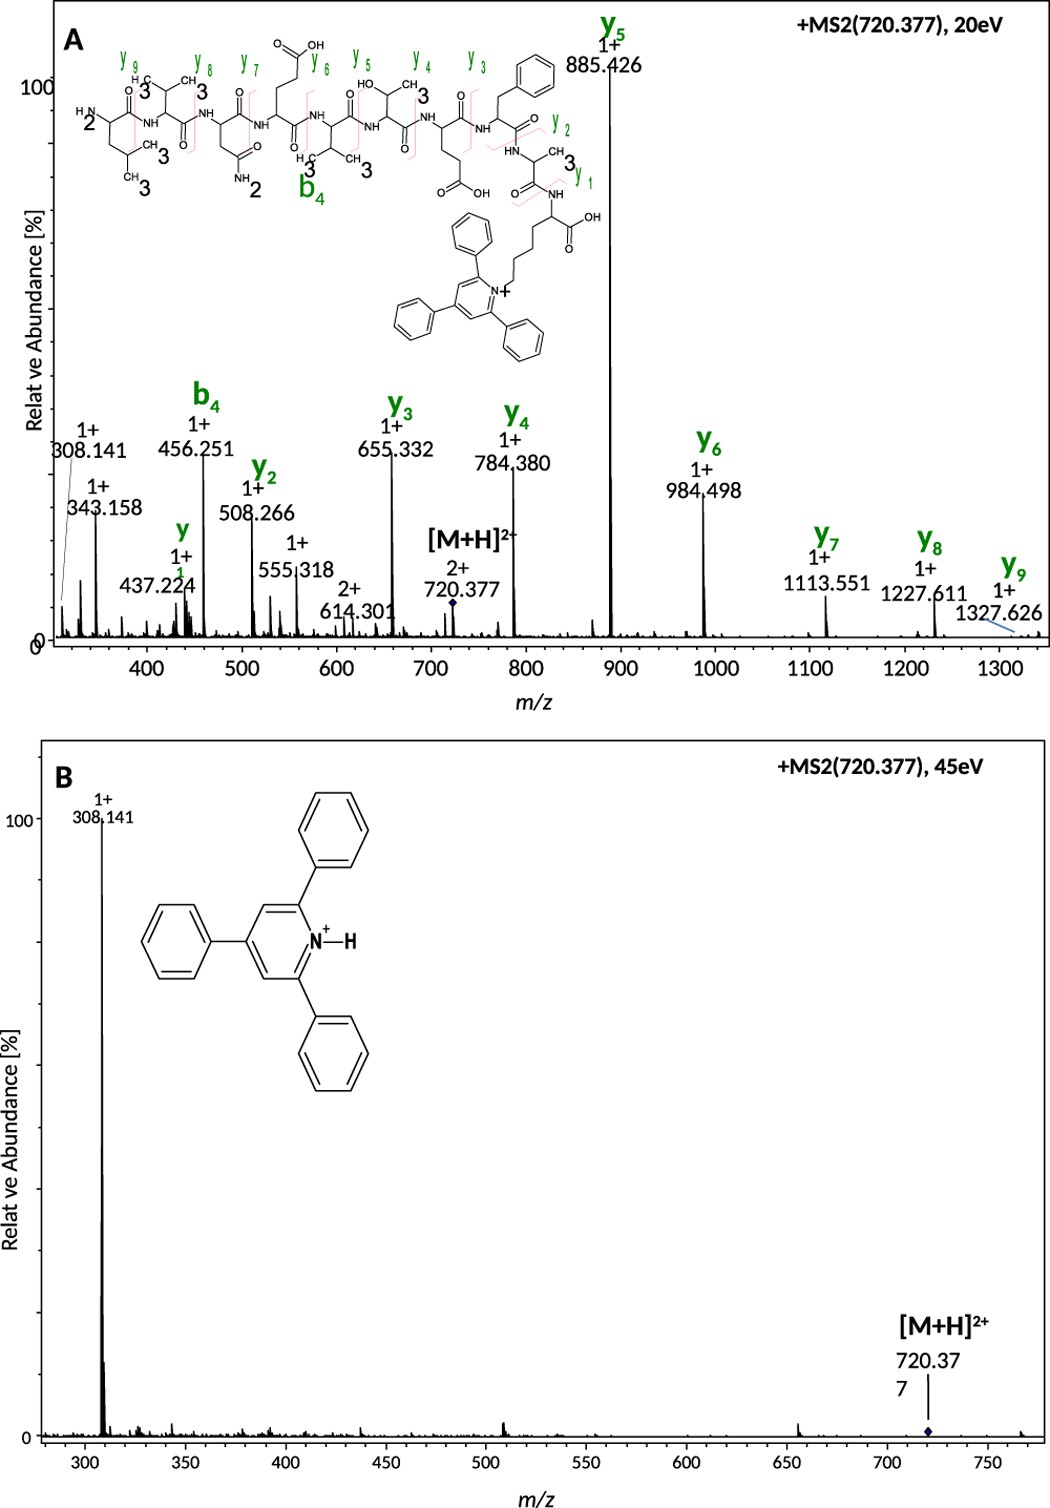 Peptides Labeled with Pyridinium Salts for Sensitive Detection and  Sequencing by Electrospray Tandem Mass Spectrometry | Scientific Reports